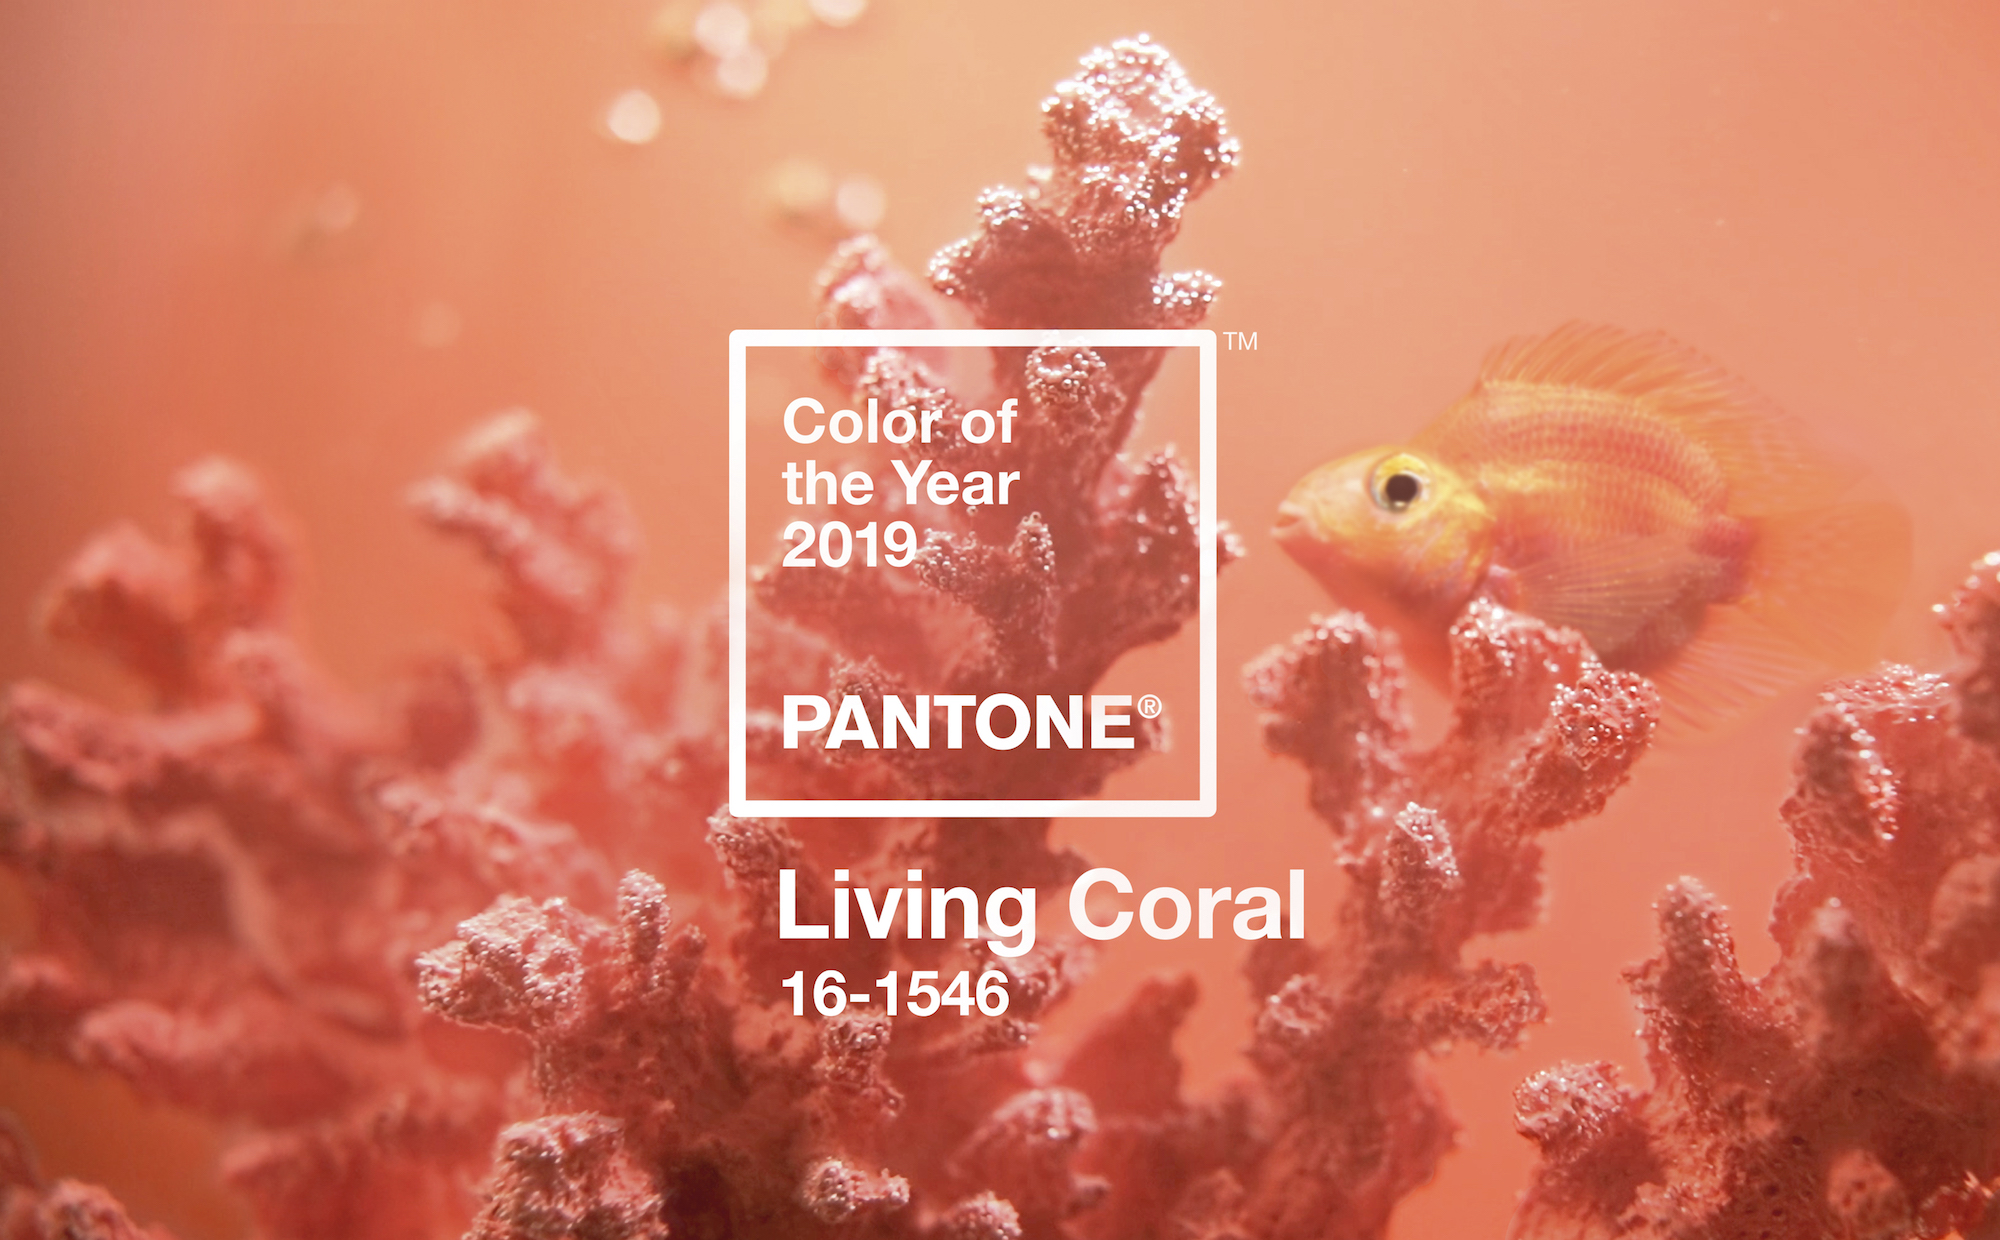 Pantone’s 2019 Color of the Year